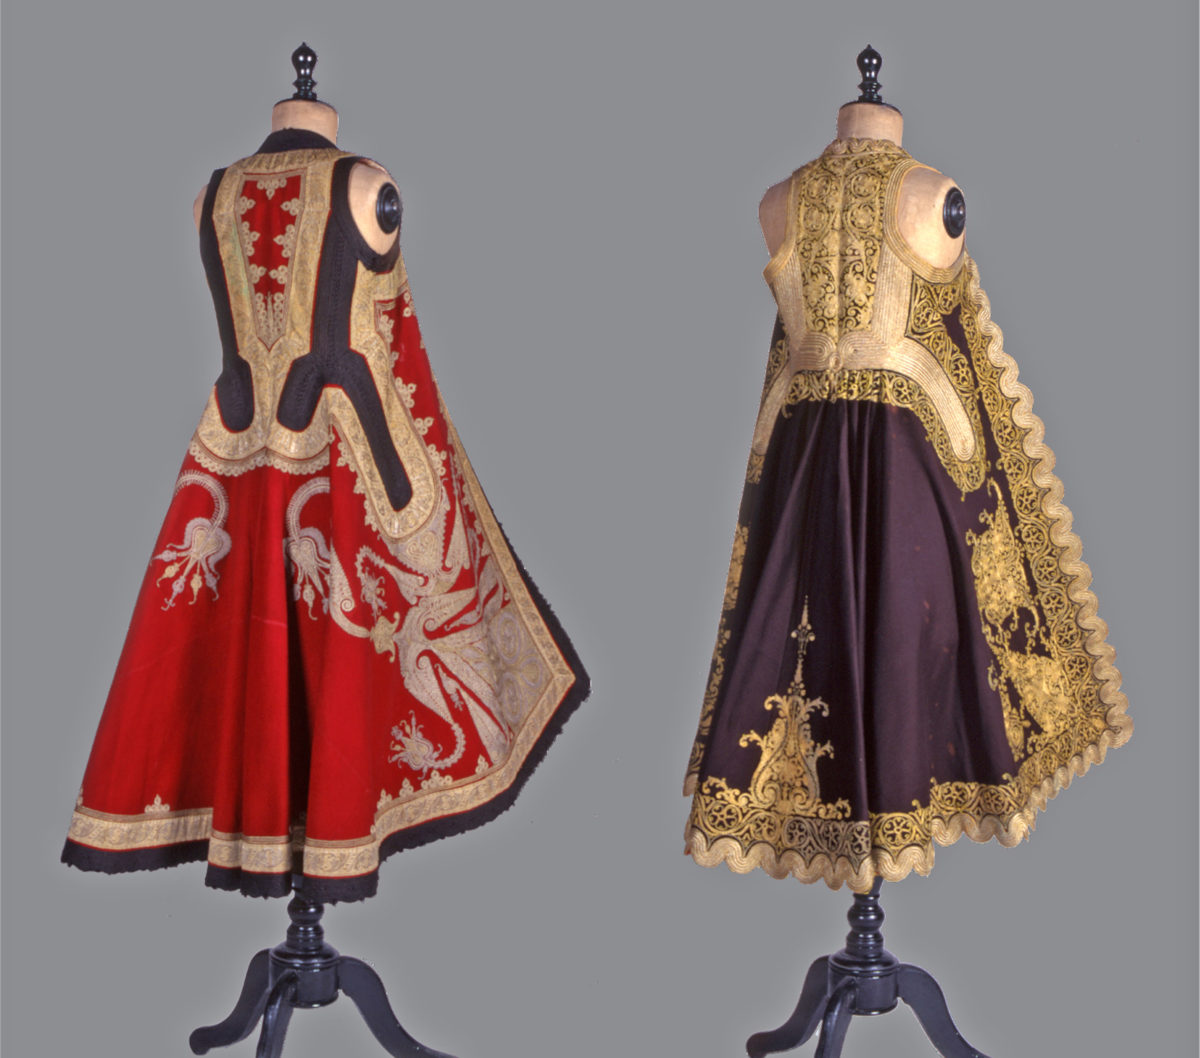 'Doulamas', man’s coat from the Peloponnese, and 'pirpiri', coat belonging to a woman’s town dress from Ioannina, Epirus, 2nd half of 19th century, Peloponnesian Folklore Foundation, Nafplio (1976.6.1169, 1998.6.46).